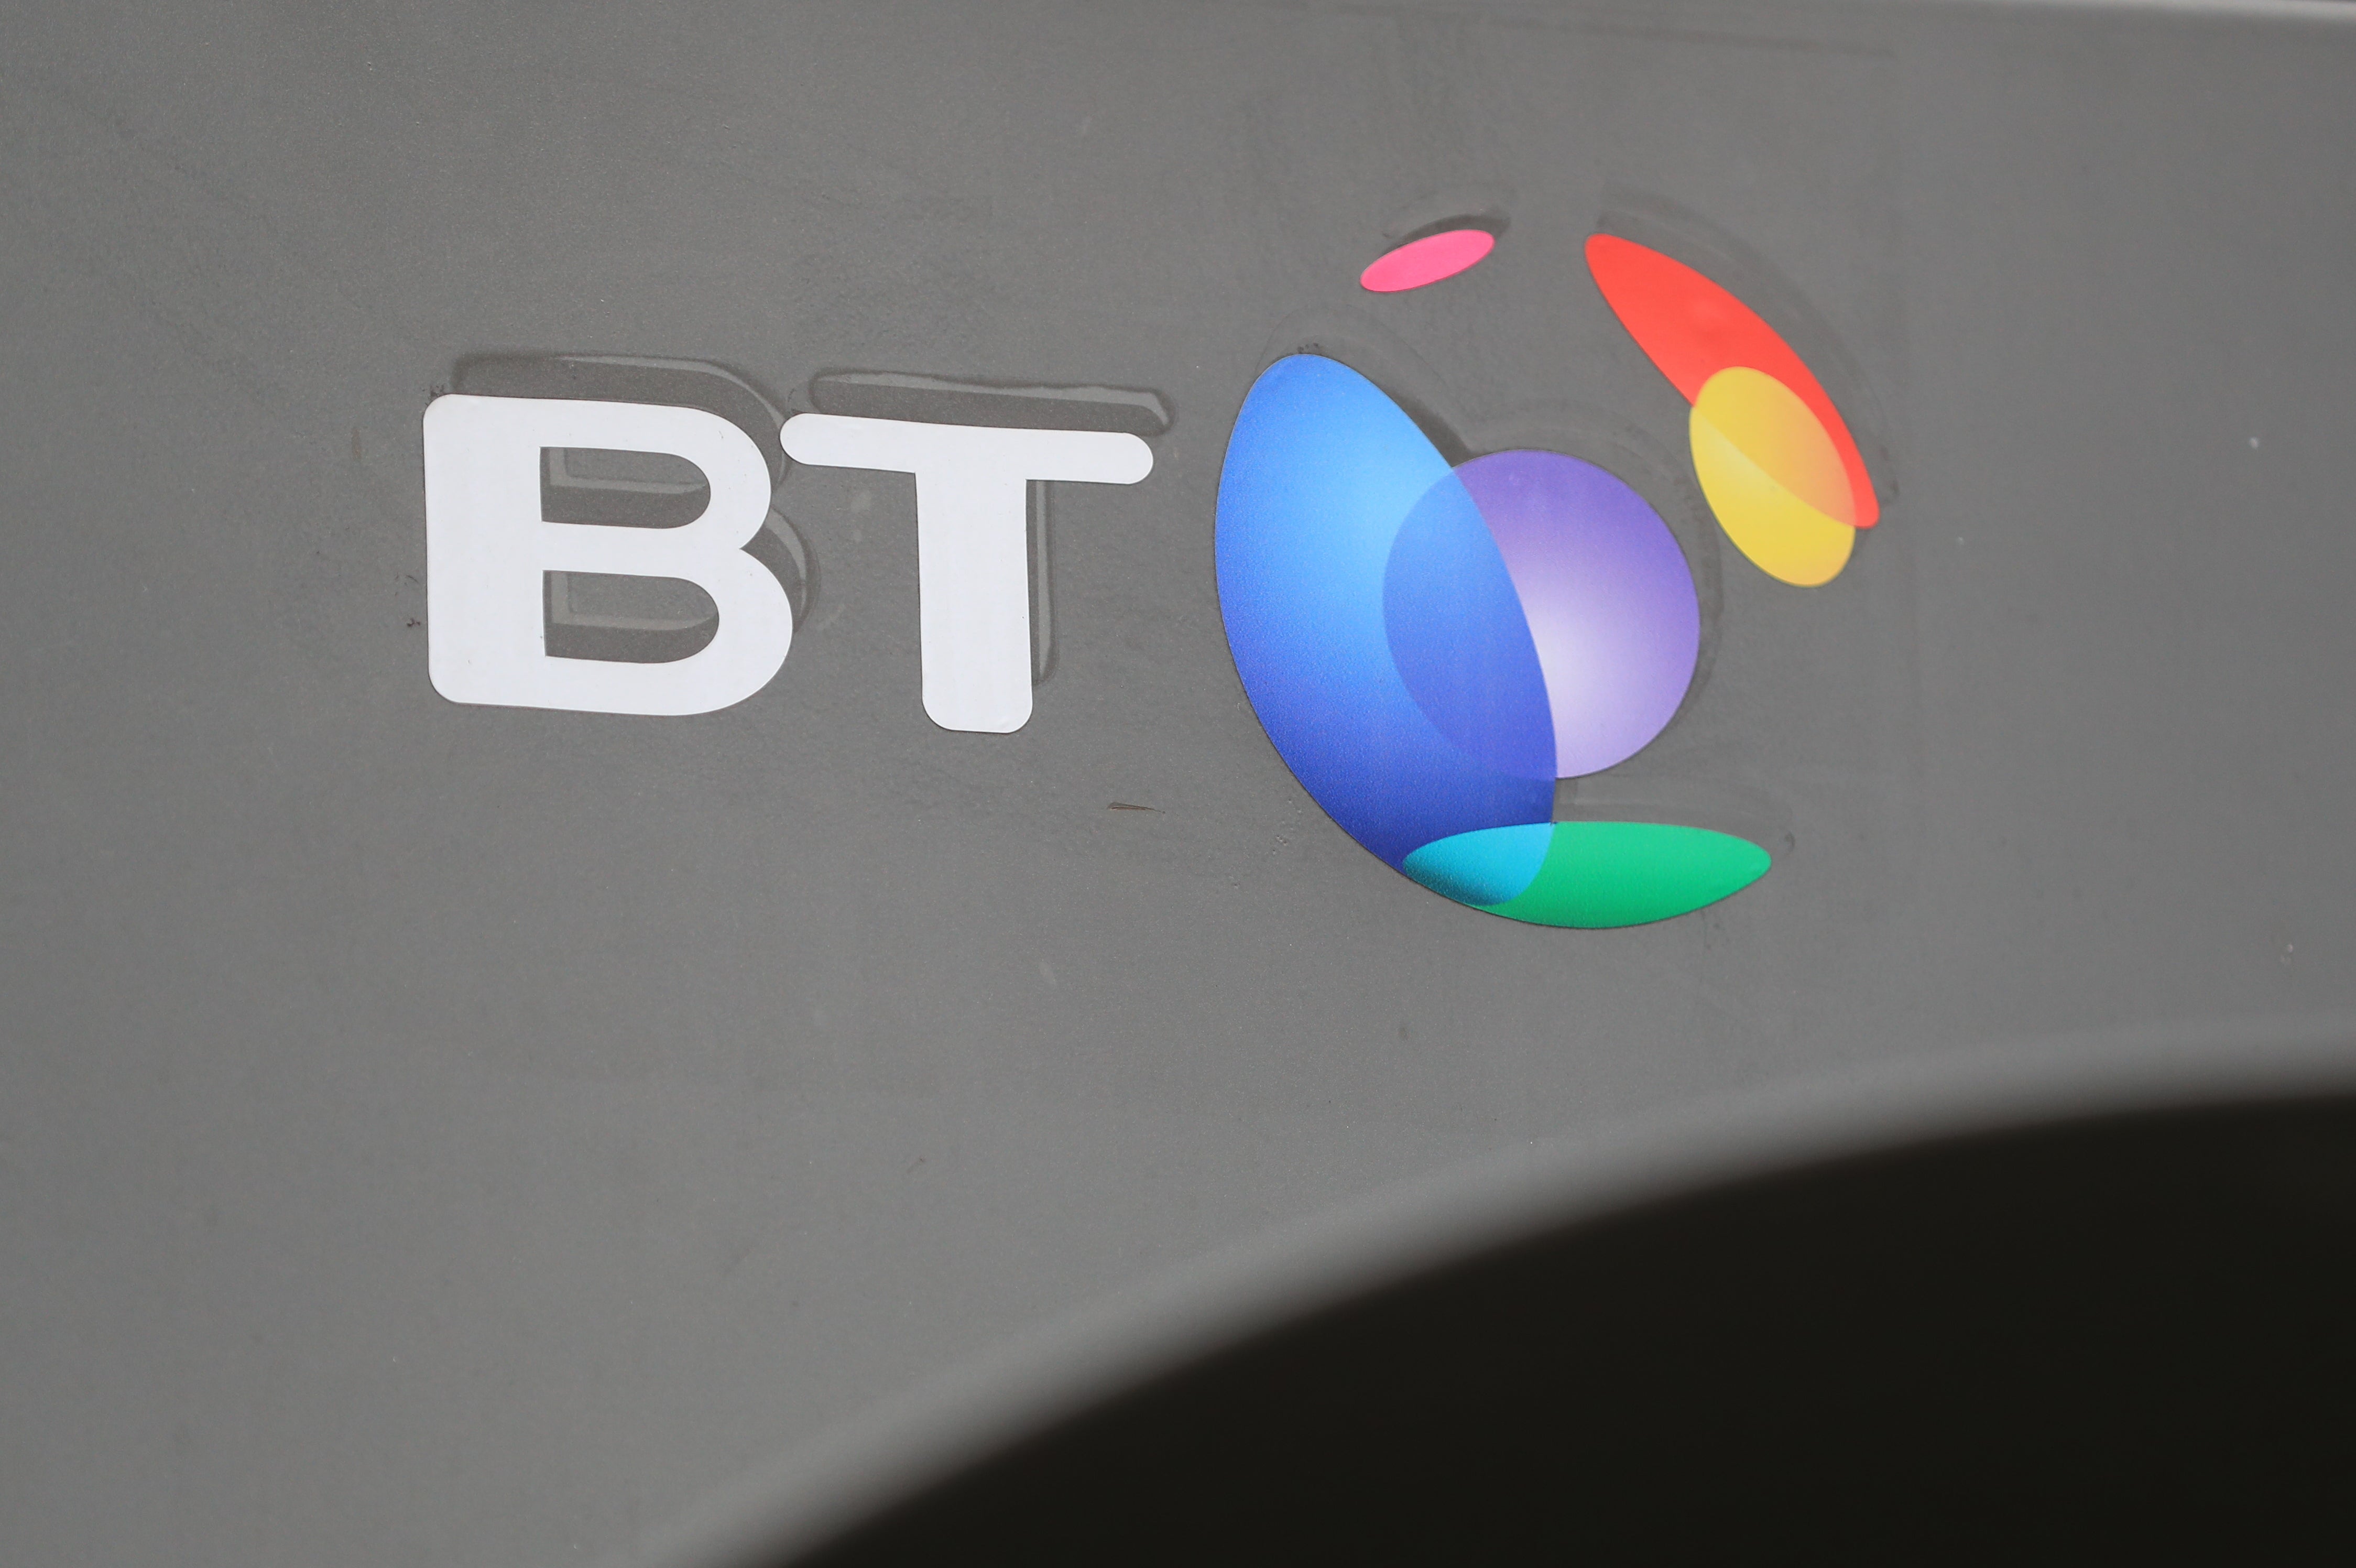 BT users complained of internet issues on Thursday, 14 October, 2021